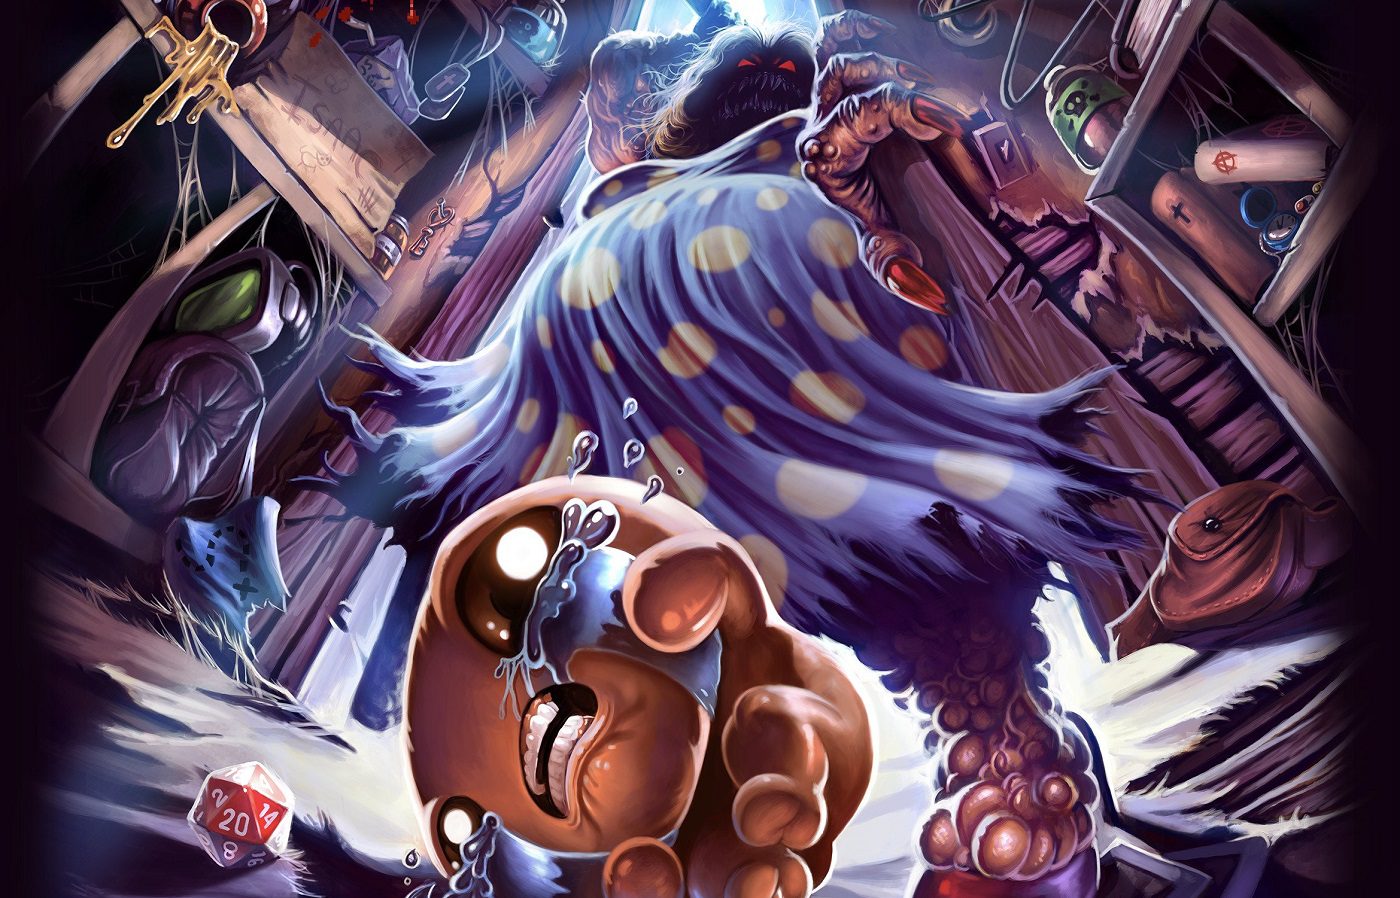 Binding Of Isaac Gets Second Print On Nintendo Switch With Brand New Art -  My Nintendo News